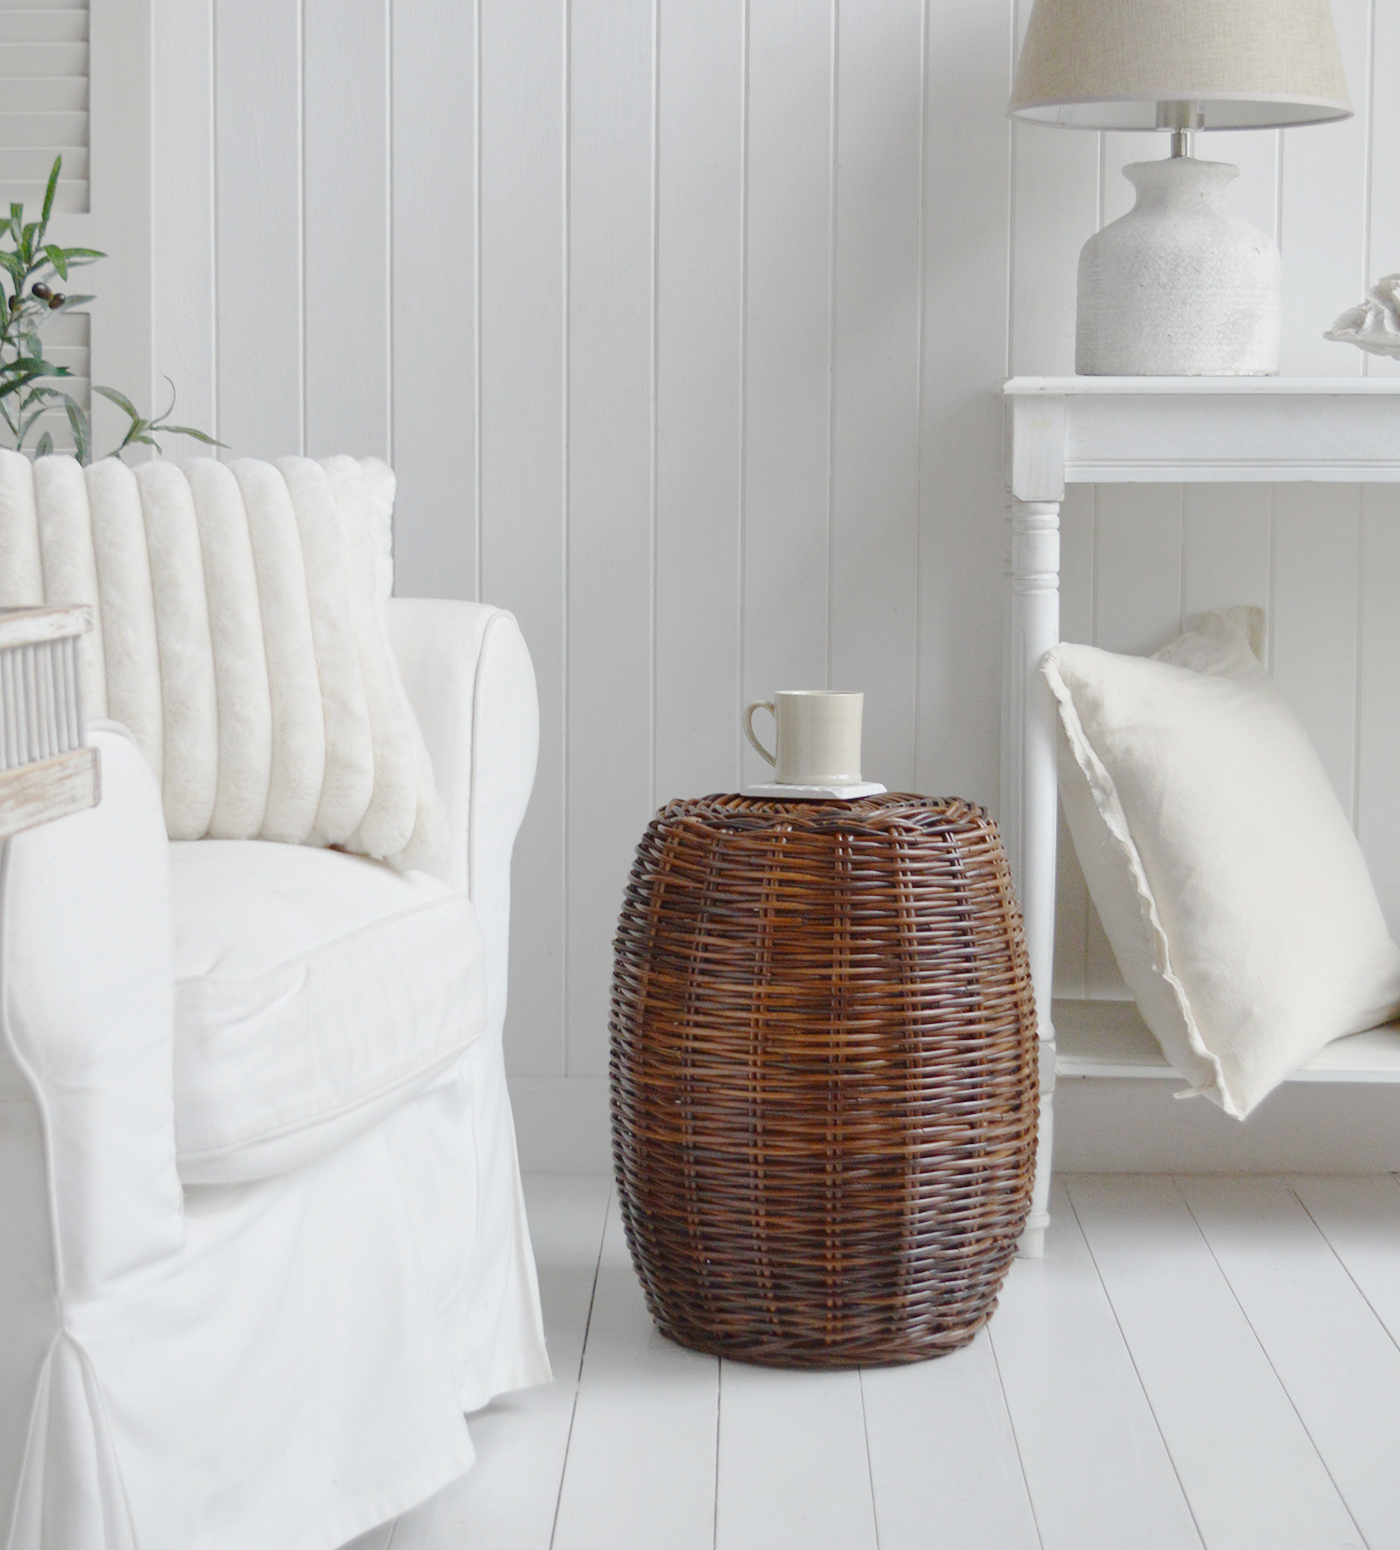 Bethel Cove Rattan stool, Seat or side table - Coastal New England and Hamptons Furniture. Shown with a mug